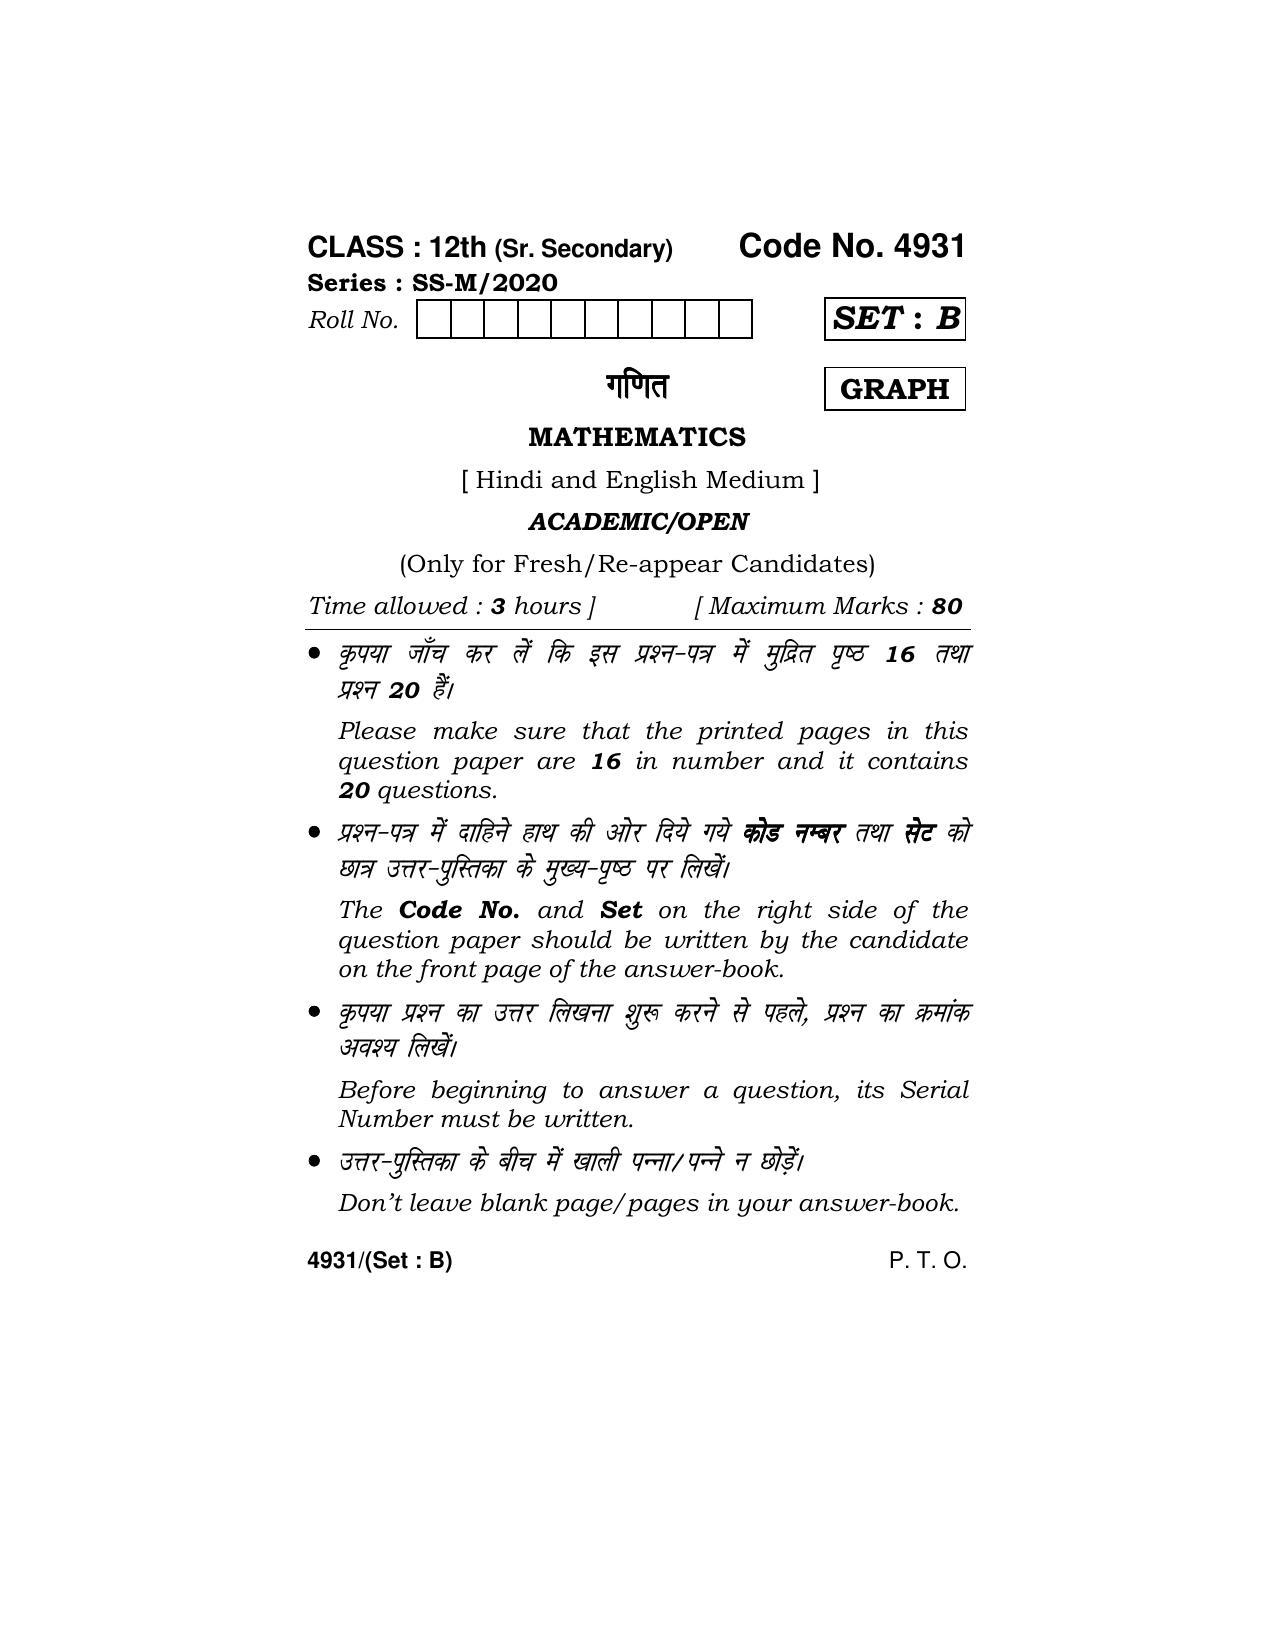 Haryana Board HBSE Class 12 Mathematics 2020 Question Paper - Page 17